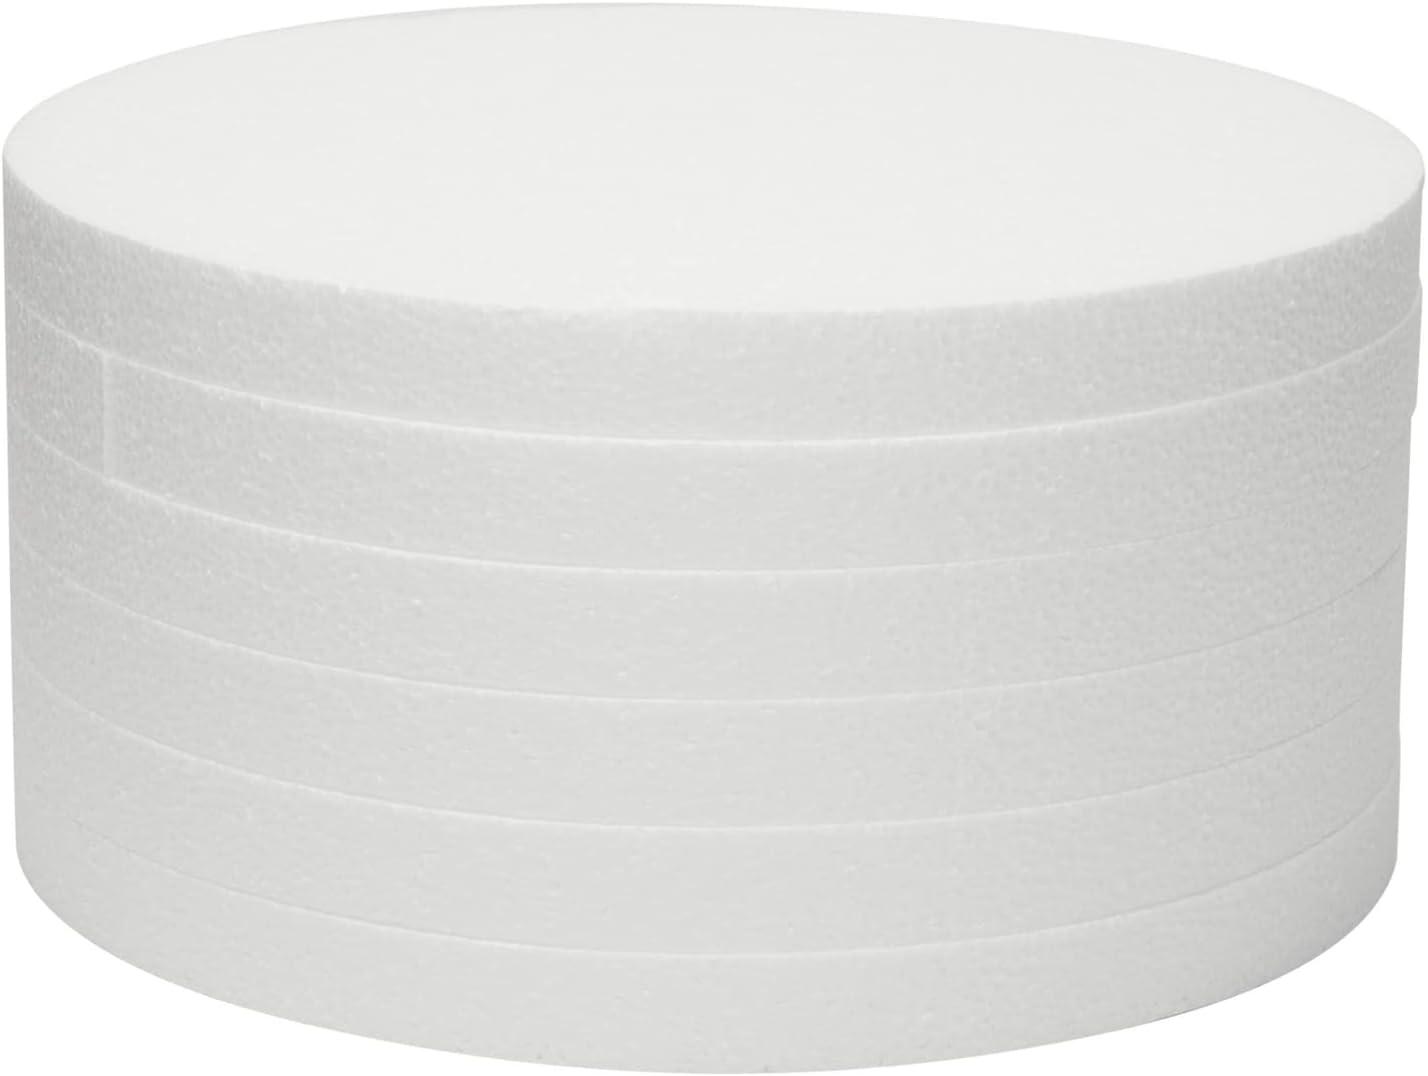 6 Pack 12x12-inch Round Foam Circles for Crafts, 1 Thick, for DIY Projects, Decorations (White)